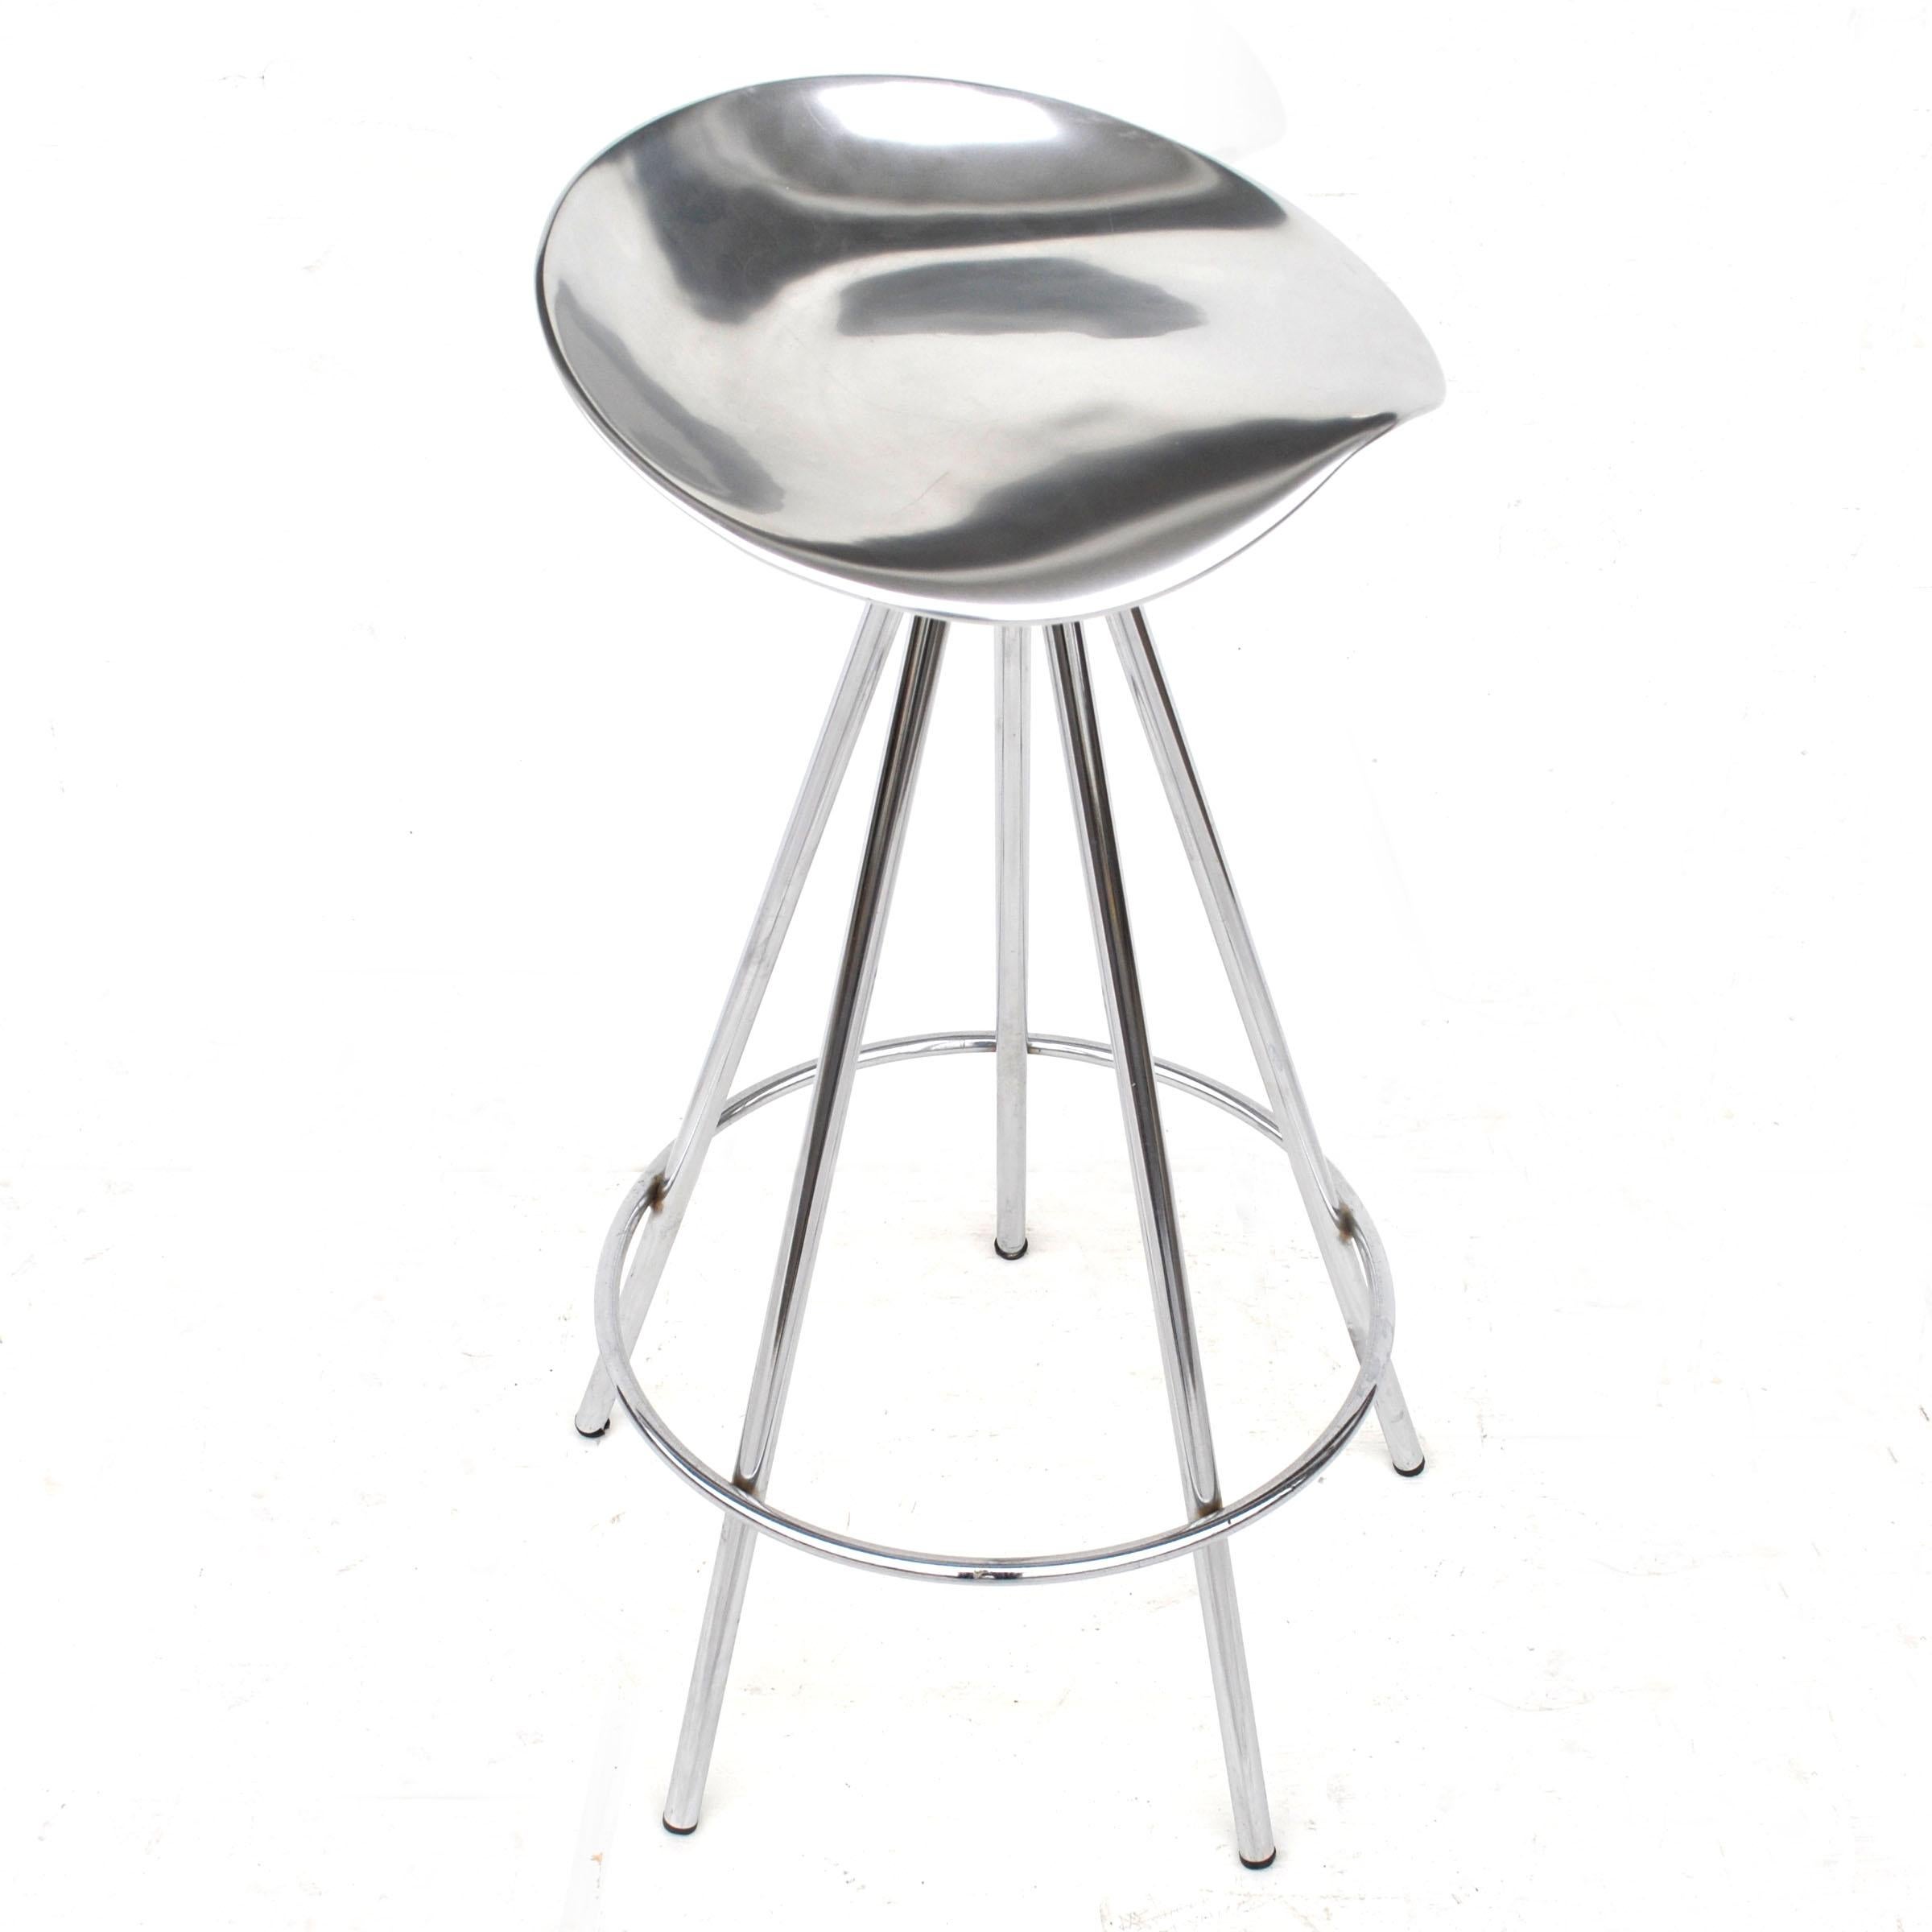 Modern stools designed by Pepe Cortes and made in Spain by Amat-3. These stools are currently being sold by Knoll. Aluminum saddle-like seats which swivel and chrome frames.